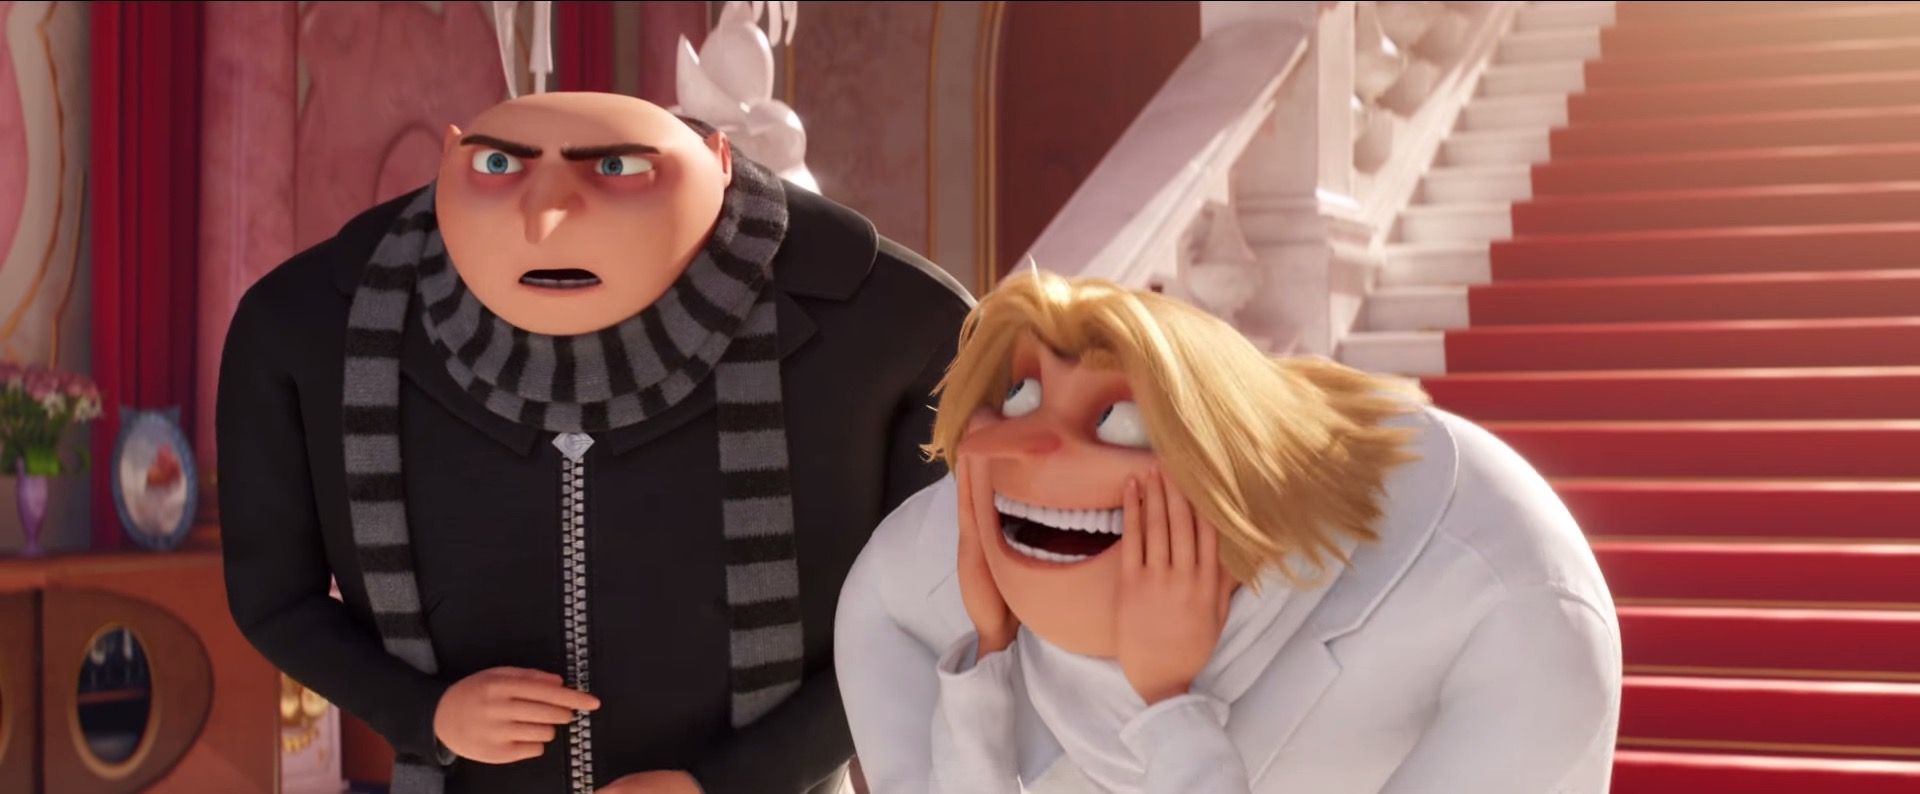 Despicable Me 3 New Trailer Introduces Gru S Long Lost Twin Brother